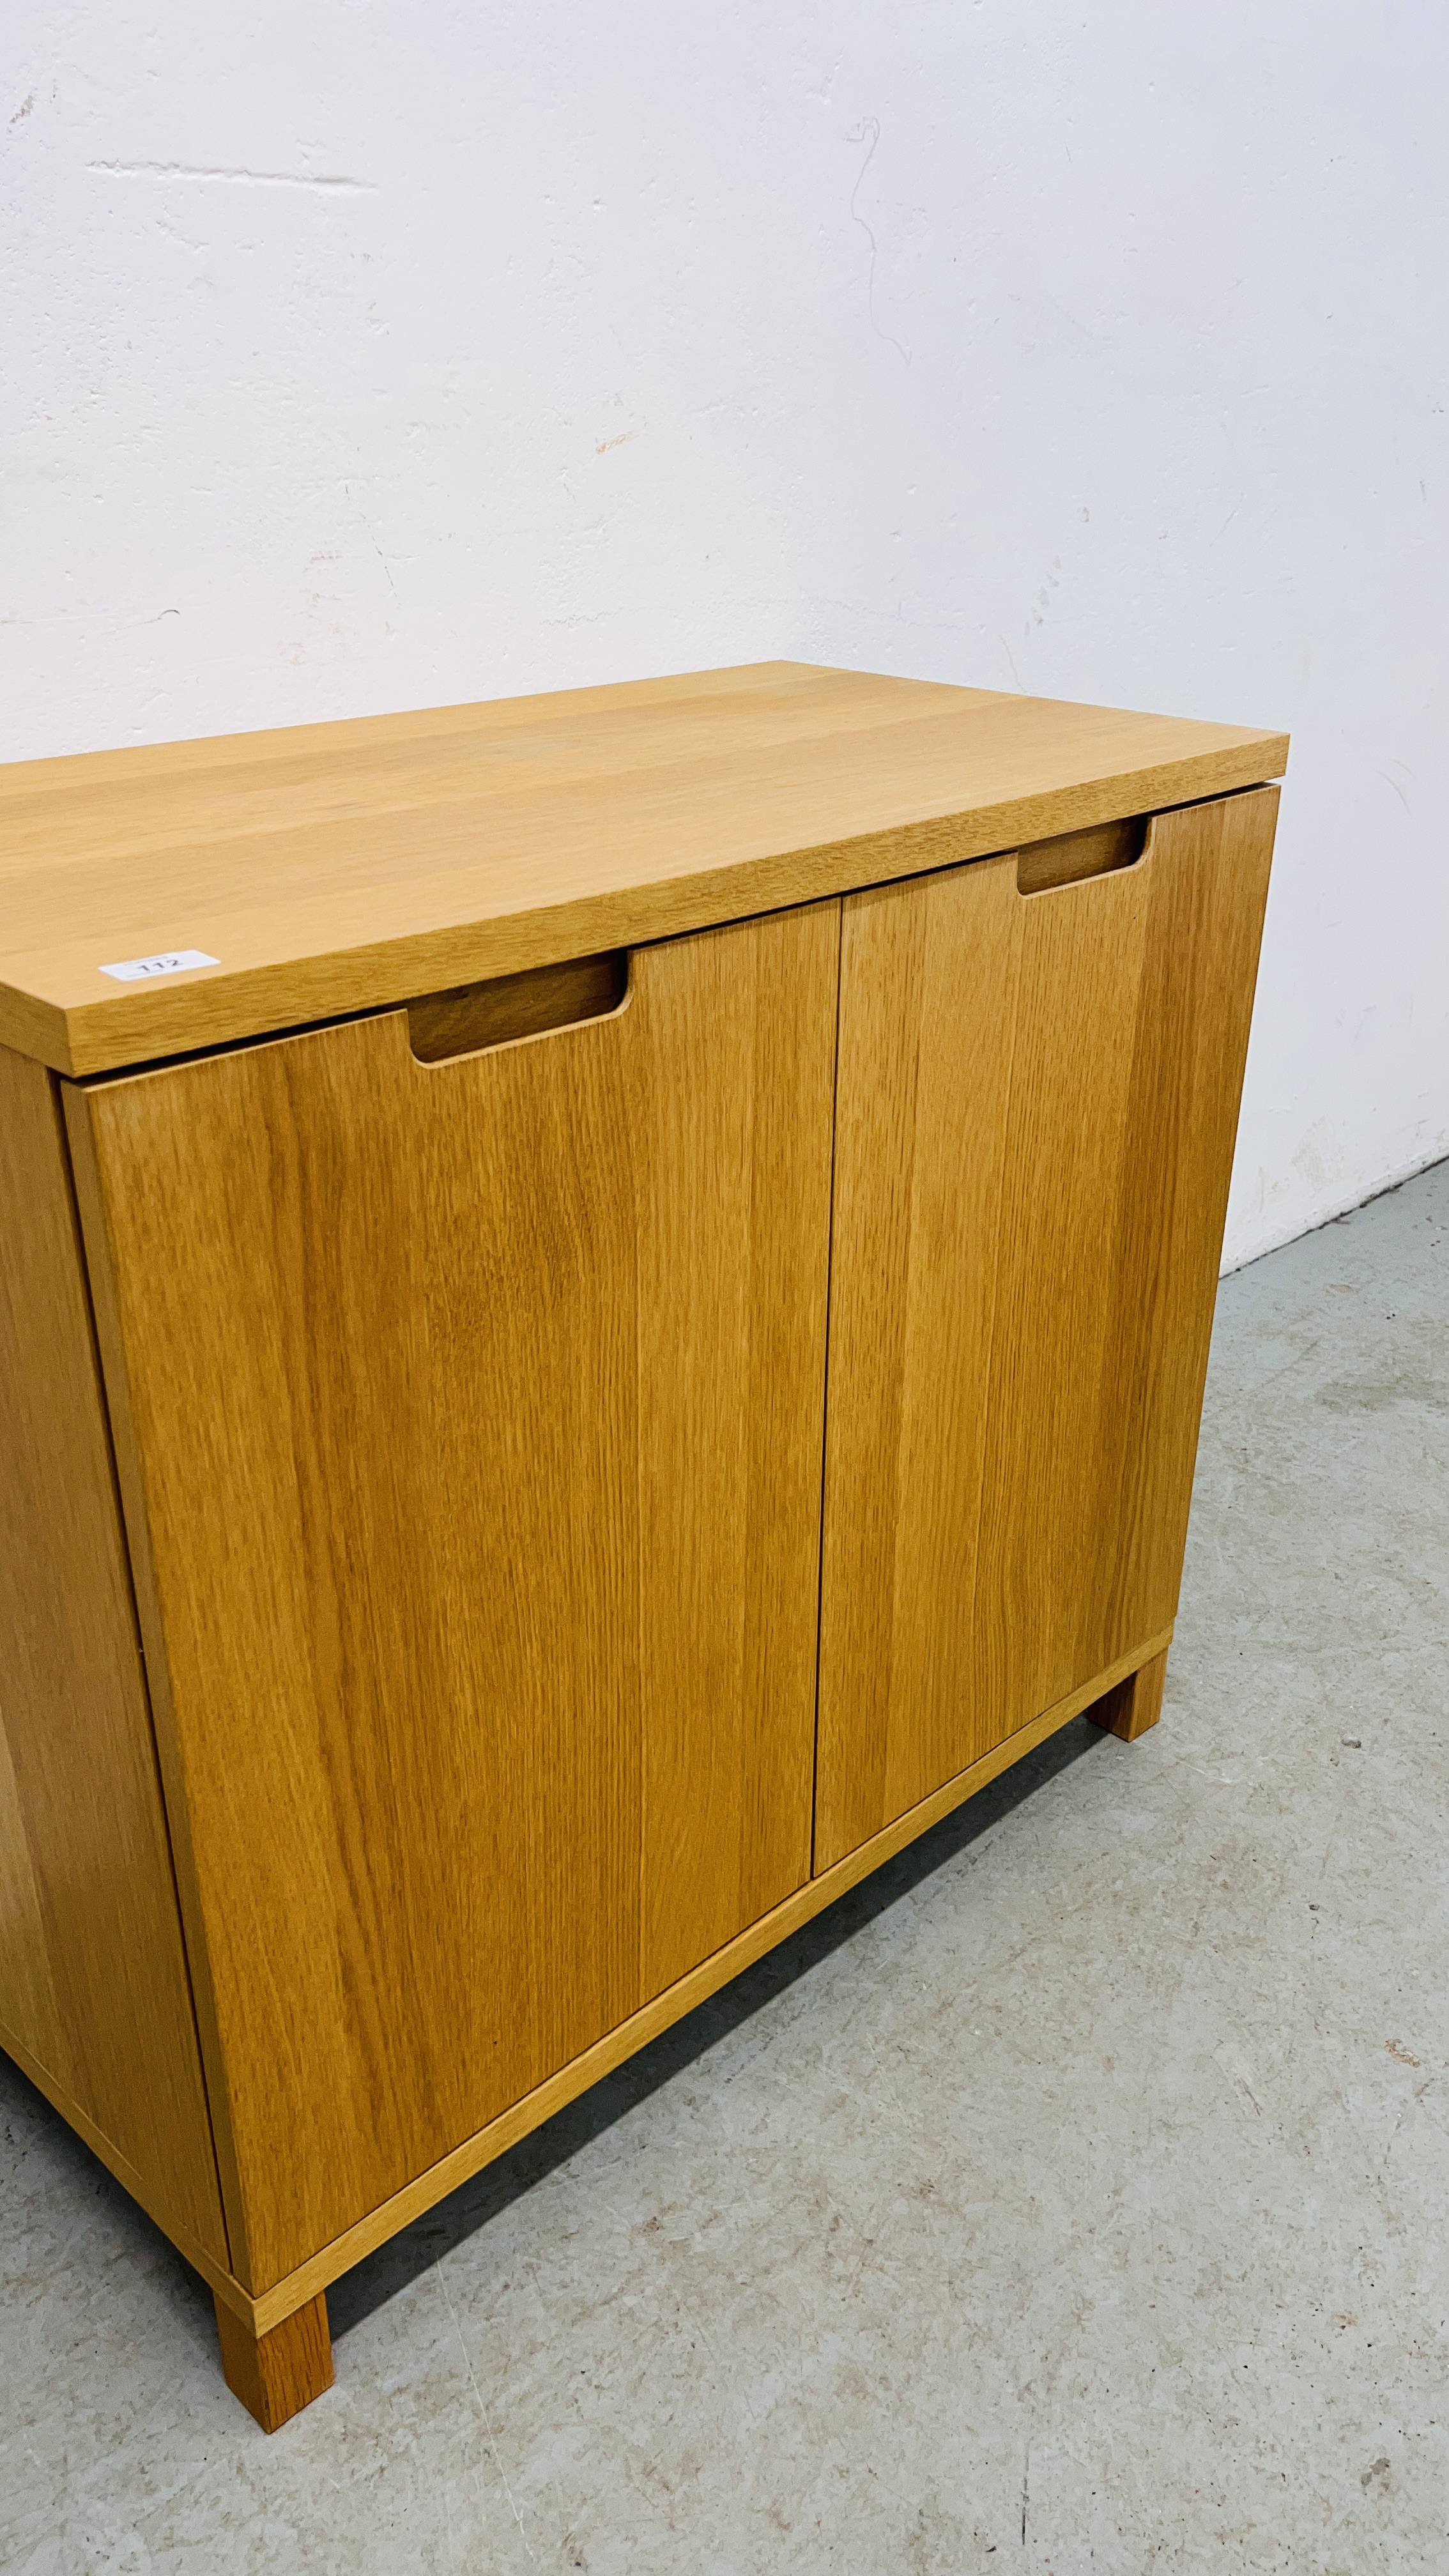 A MODERN LIGHT OAK FINISH TWO DOOR CABINET WITH SHELVED INTERIOR. - Image 5 of 9